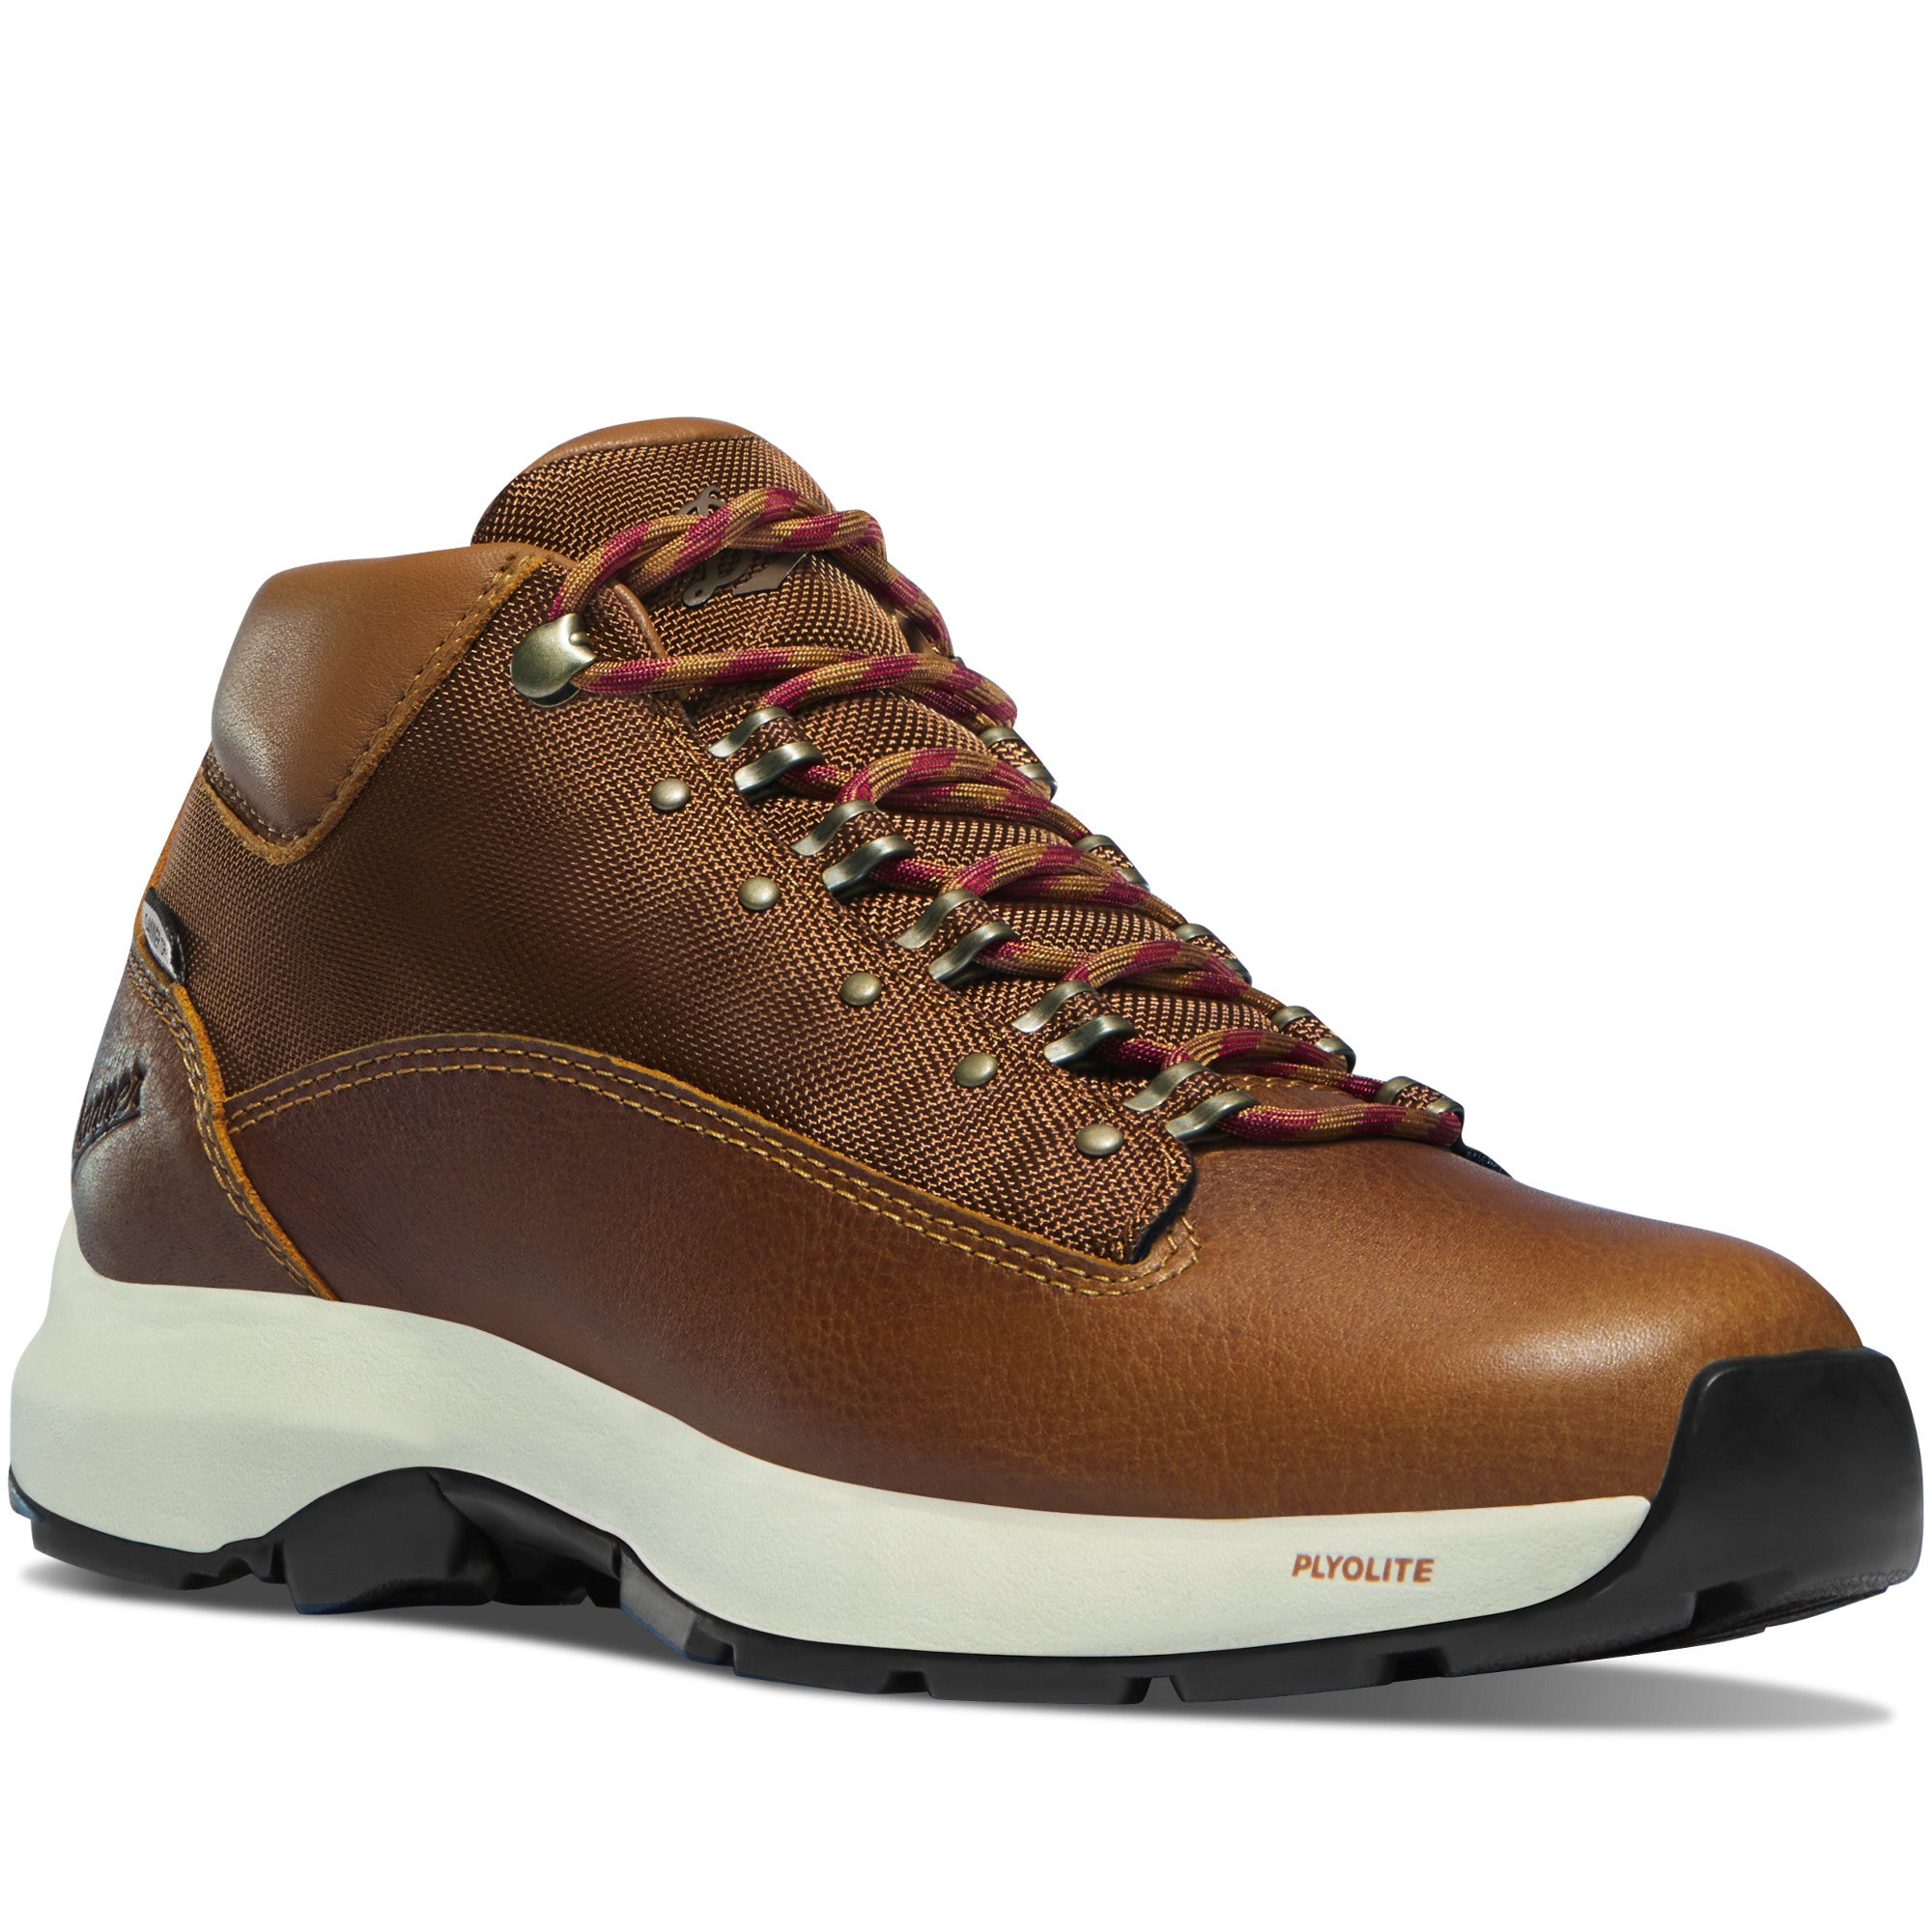 Danner Women's Caprine EVO Danner Dry Waterproof Lifestyle Boot in Cathay Spice from the side